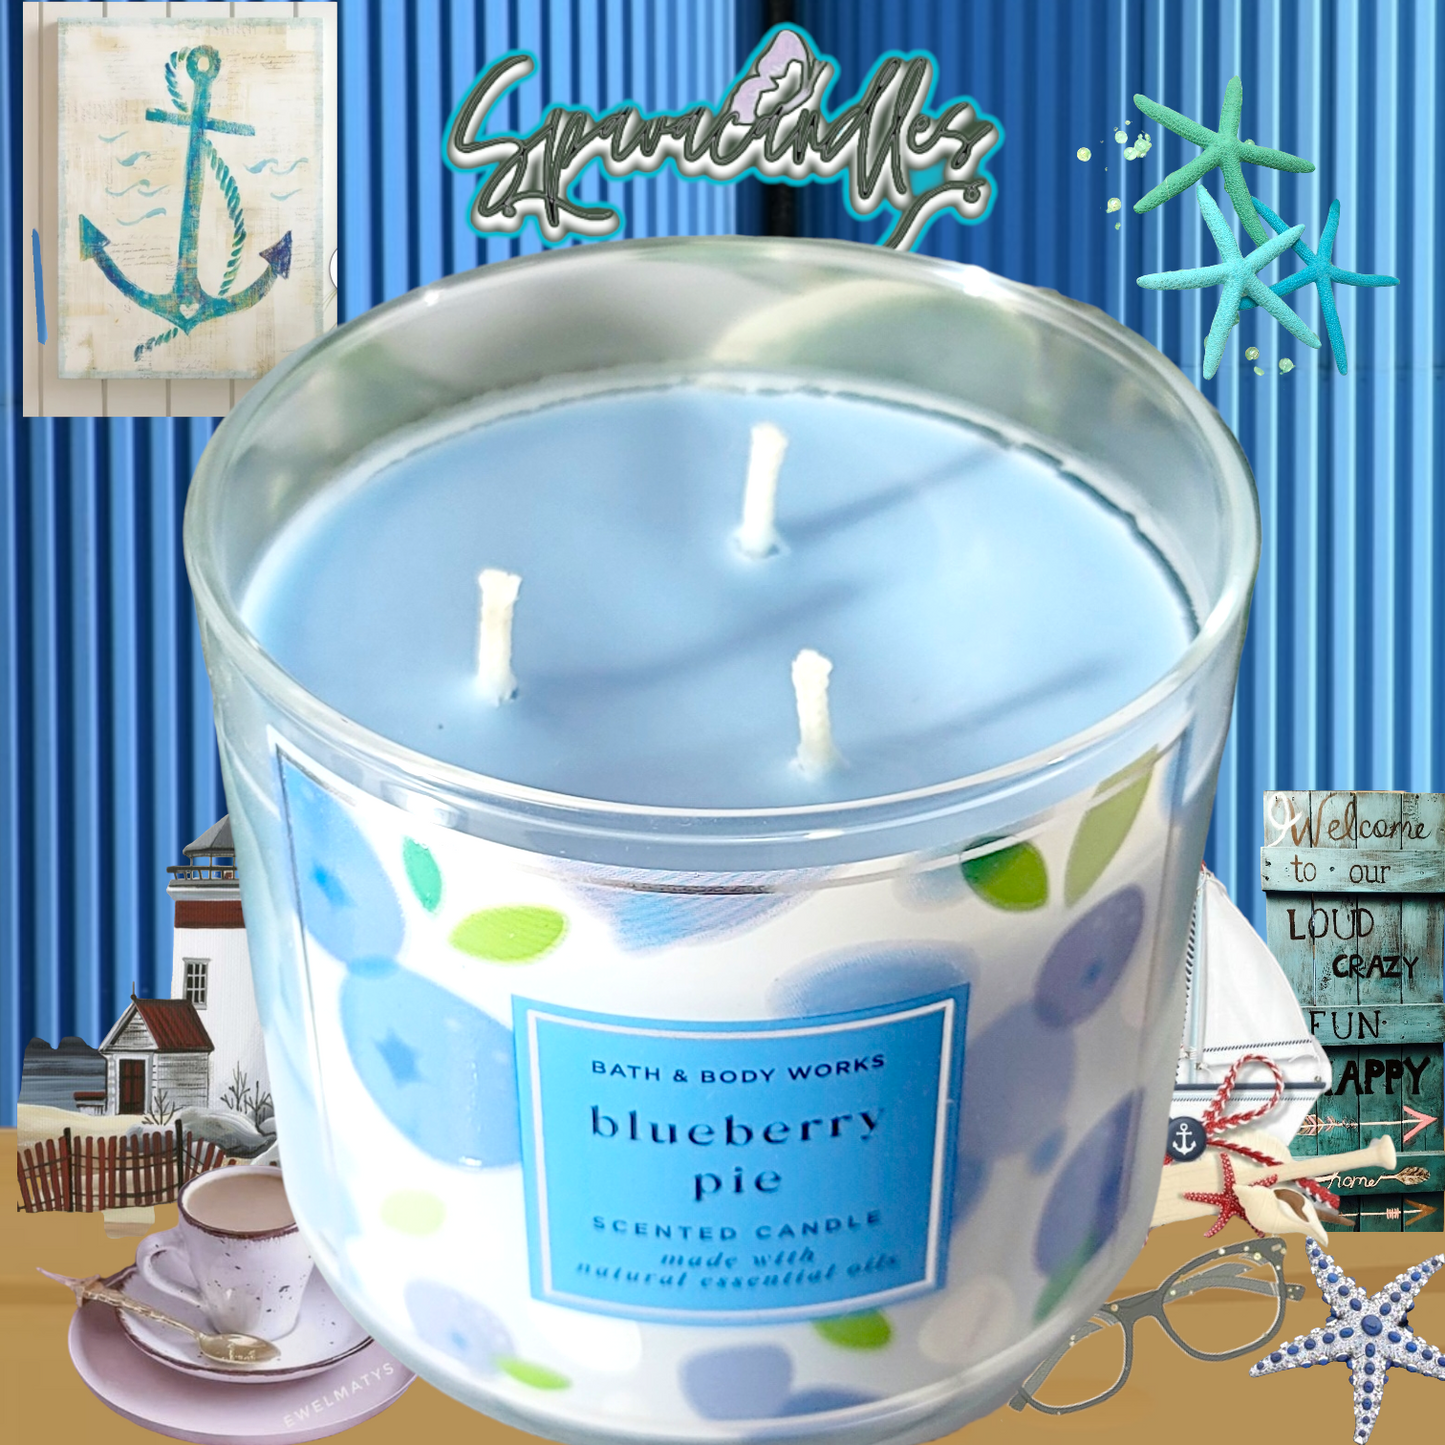 Bath & Body Works Blueberry Lavender Spritzer 3 Wick Candle Summer Ear –  Spavacandles